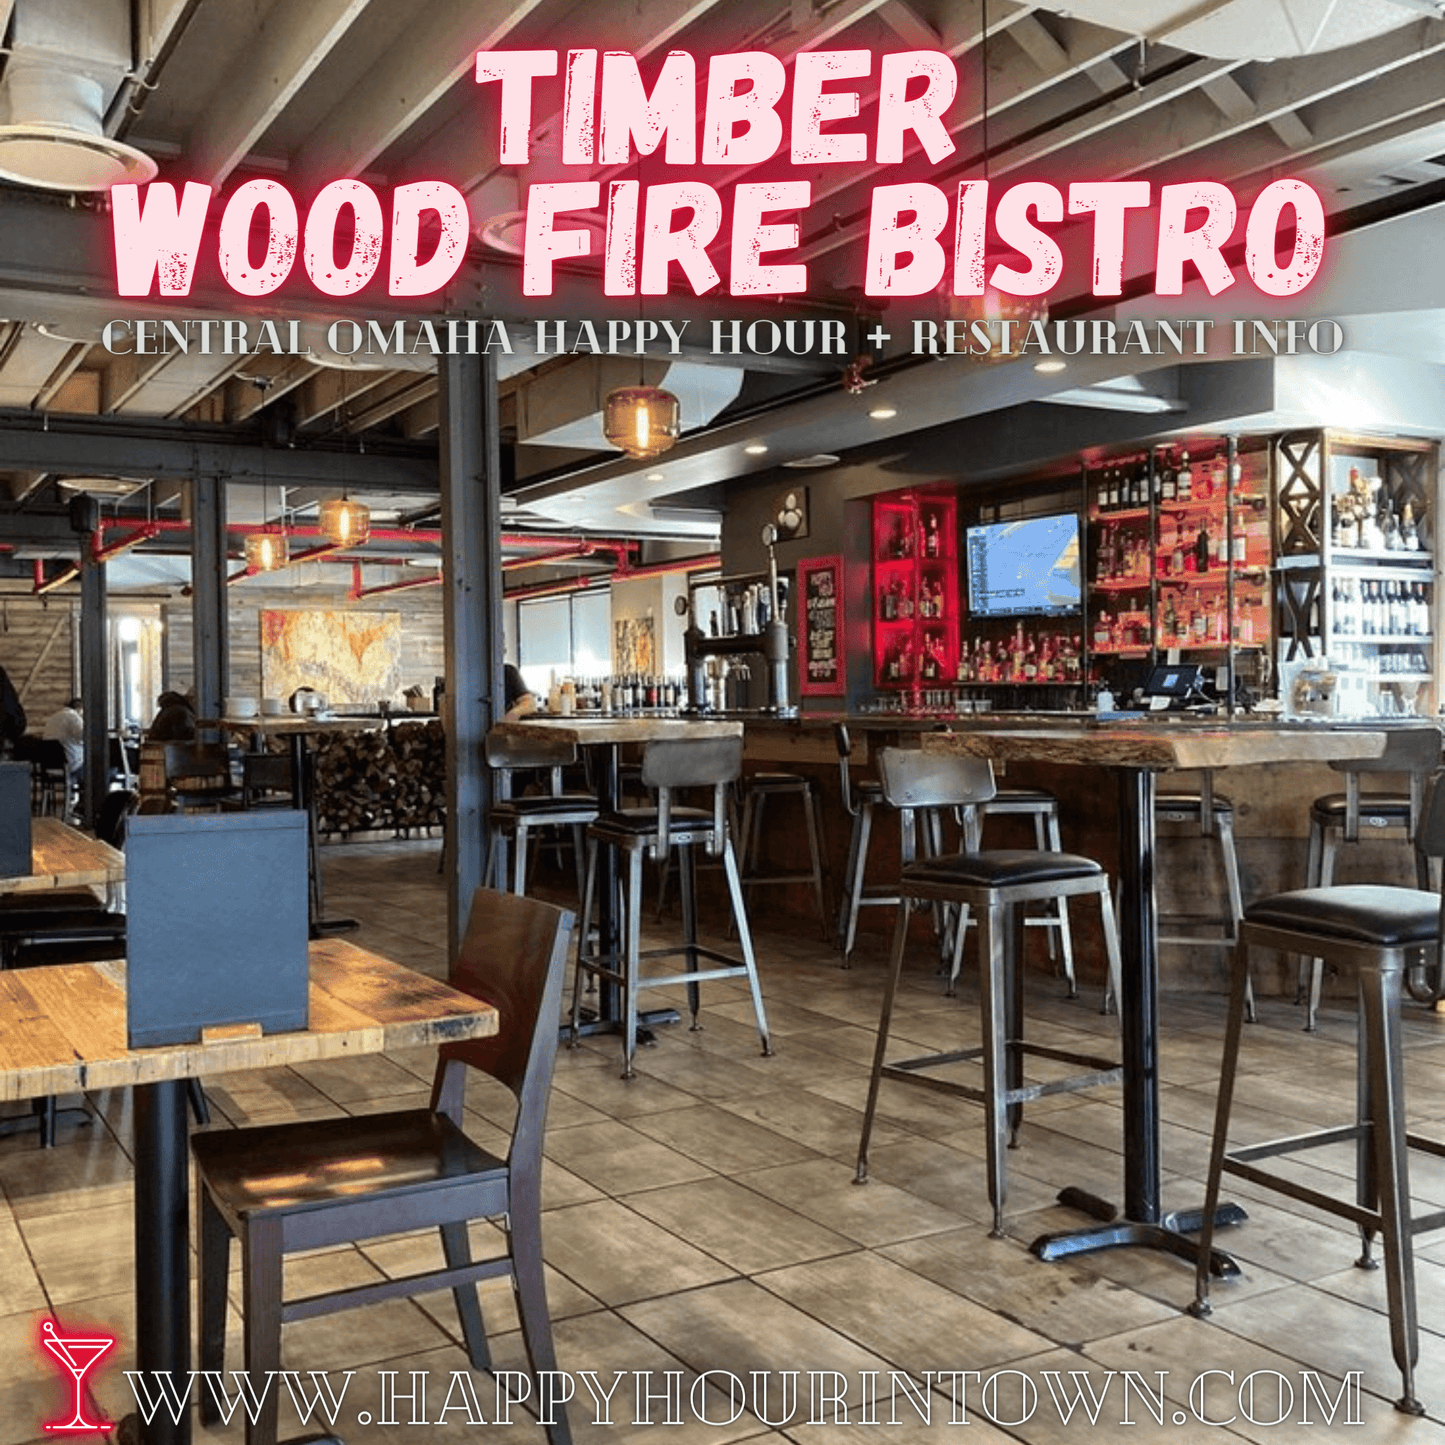 Timber Wood Fired Bistro Omaha Happy Hour